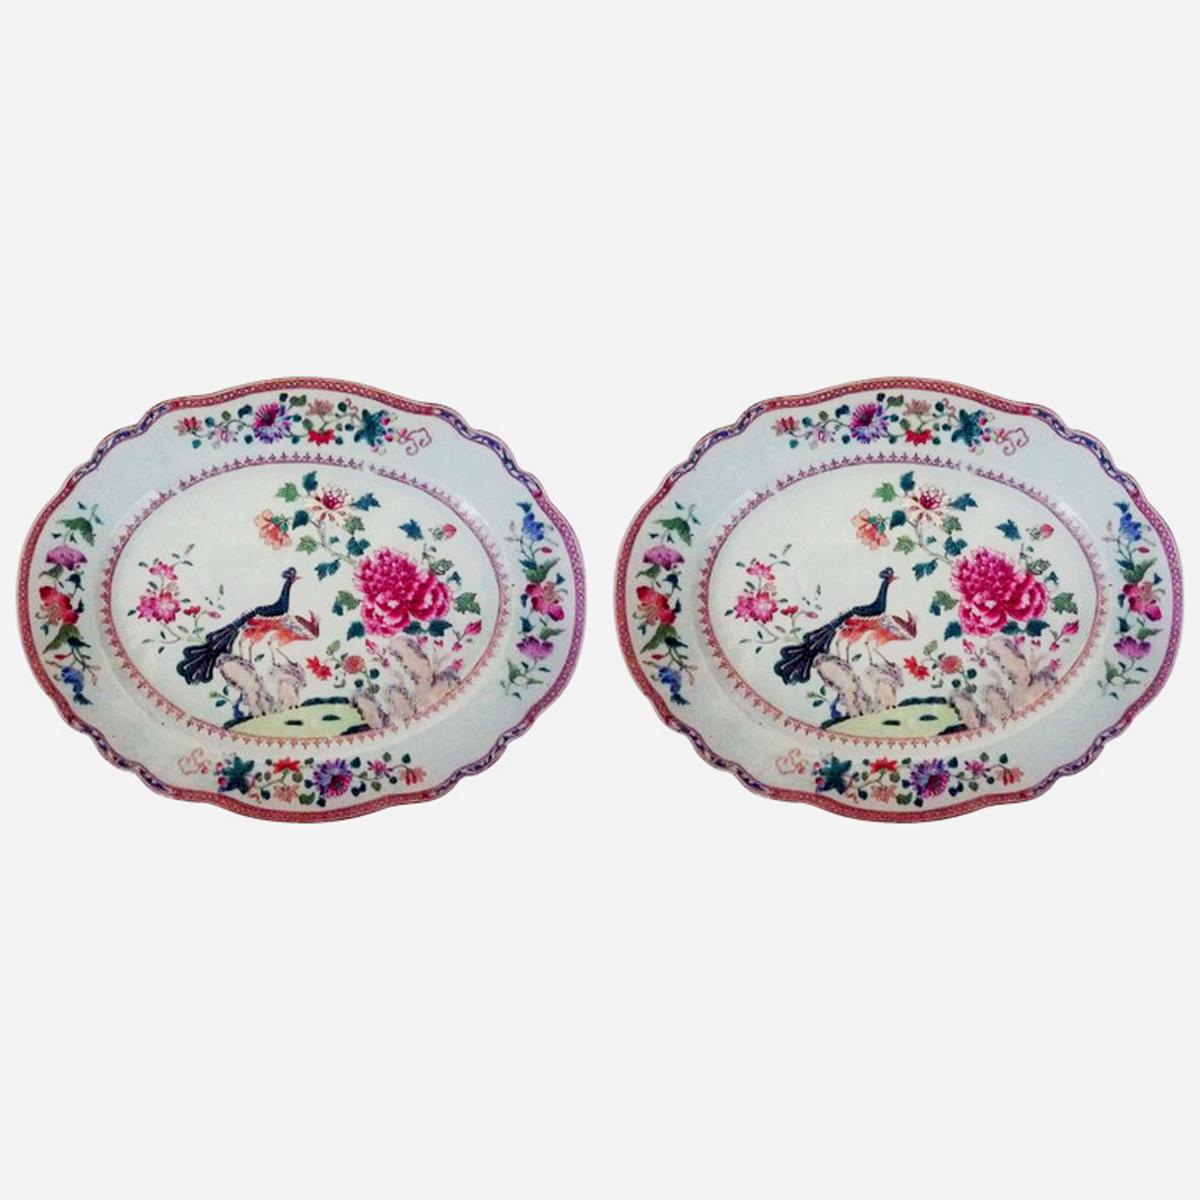 Chinese Export Porcelain Double Peacock Dishes, Circa 1765